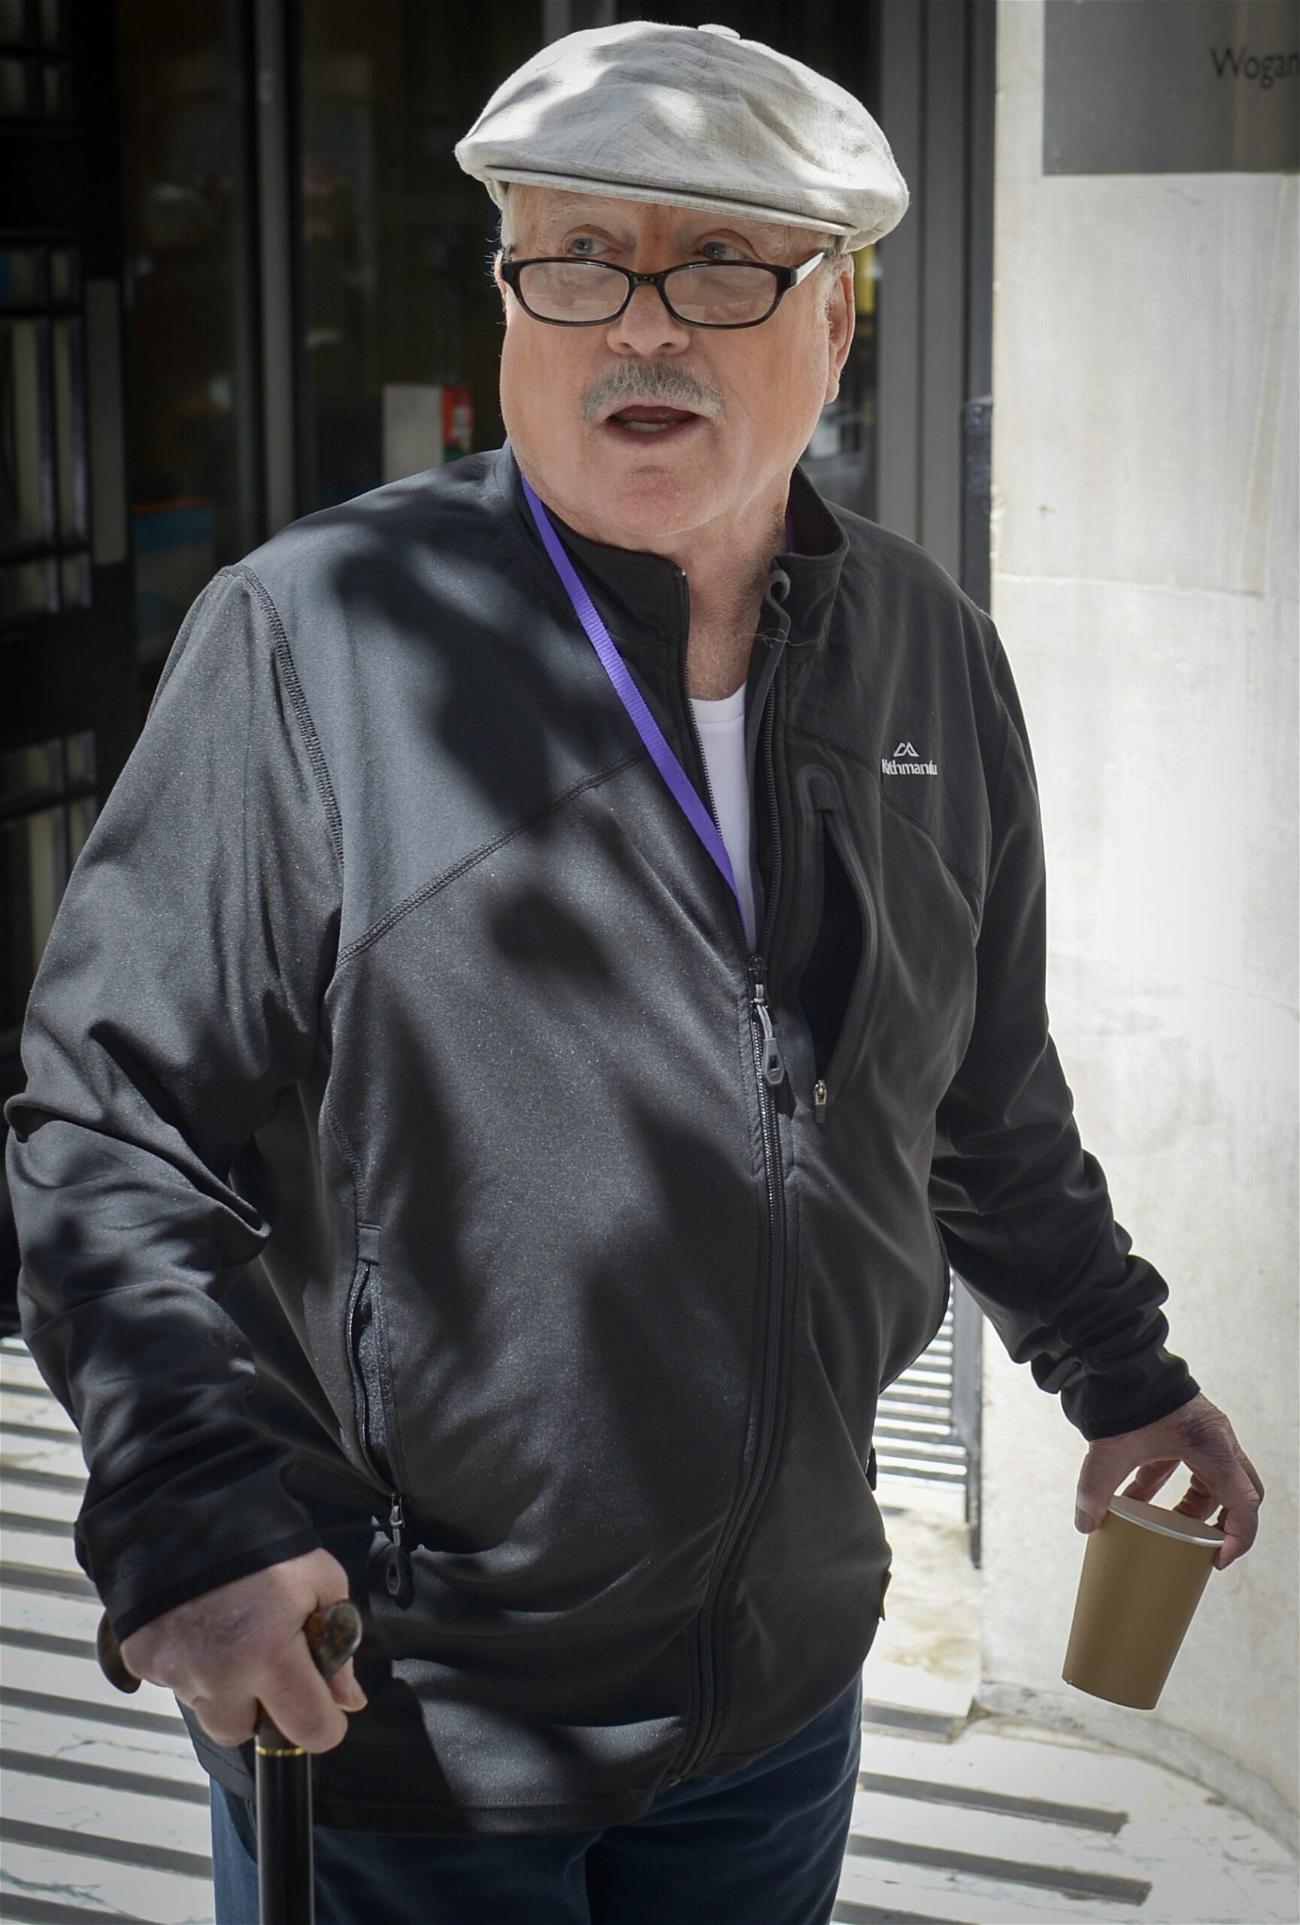 Hollywood legend Richard Dreyfuss pictured at BBC Radio 2 in London England on June 21st 2019